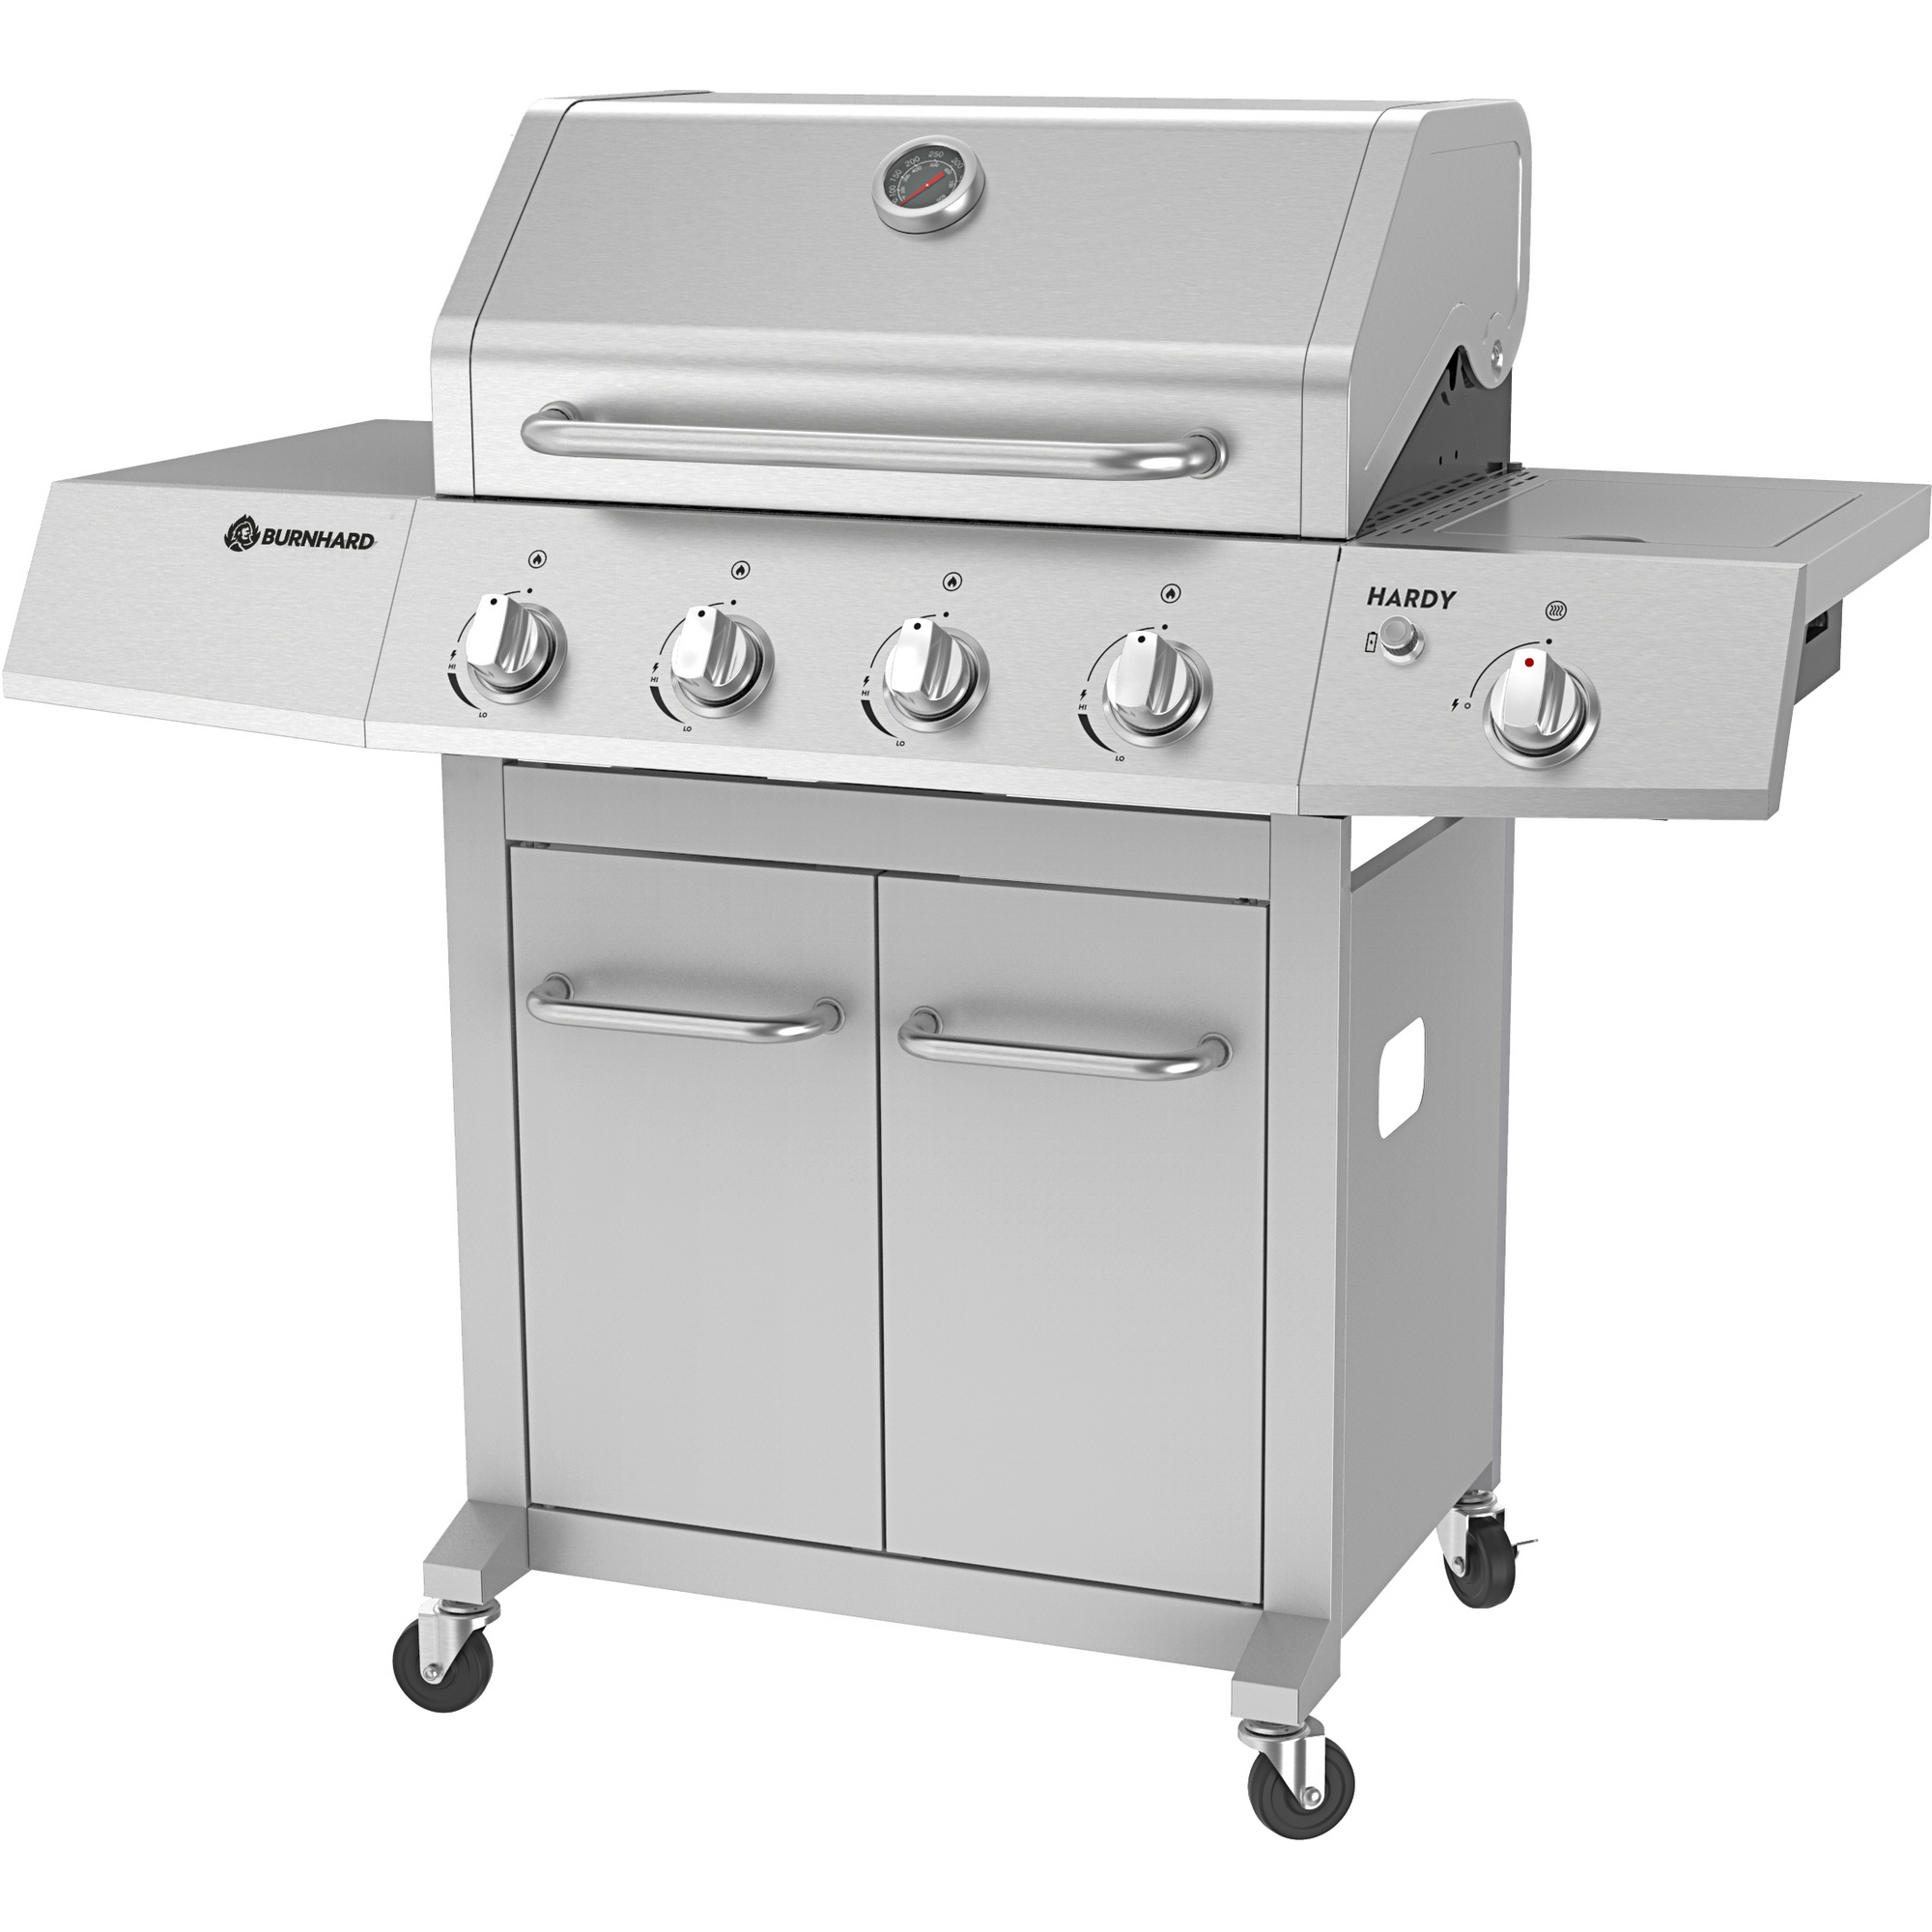 Gasgrill 'Hardy' 5 Brenner, silbern + product picture